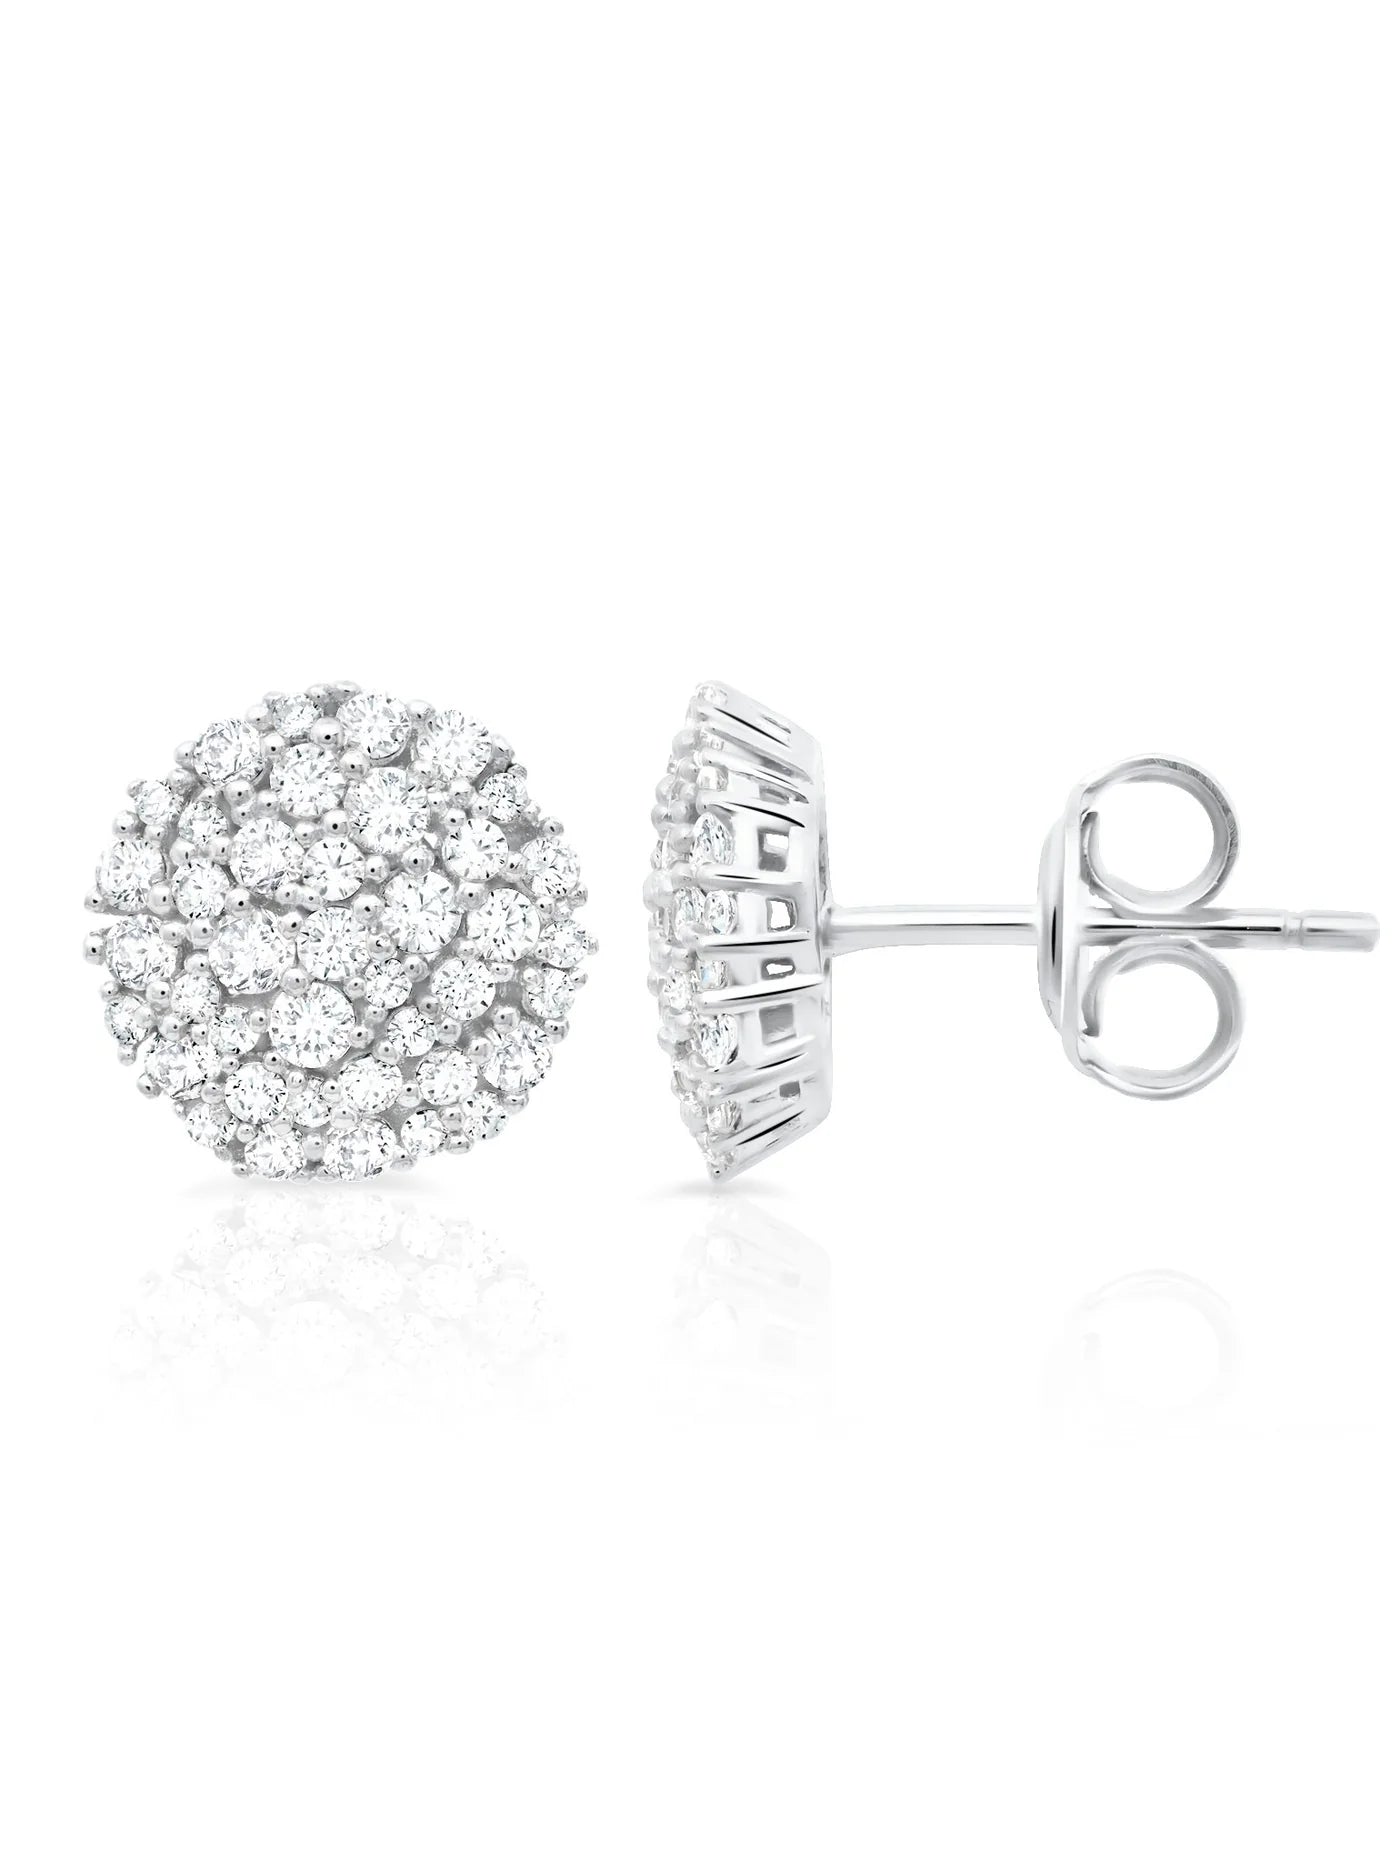 Round Glisten Stud Earrings Finished in Pure Platinum